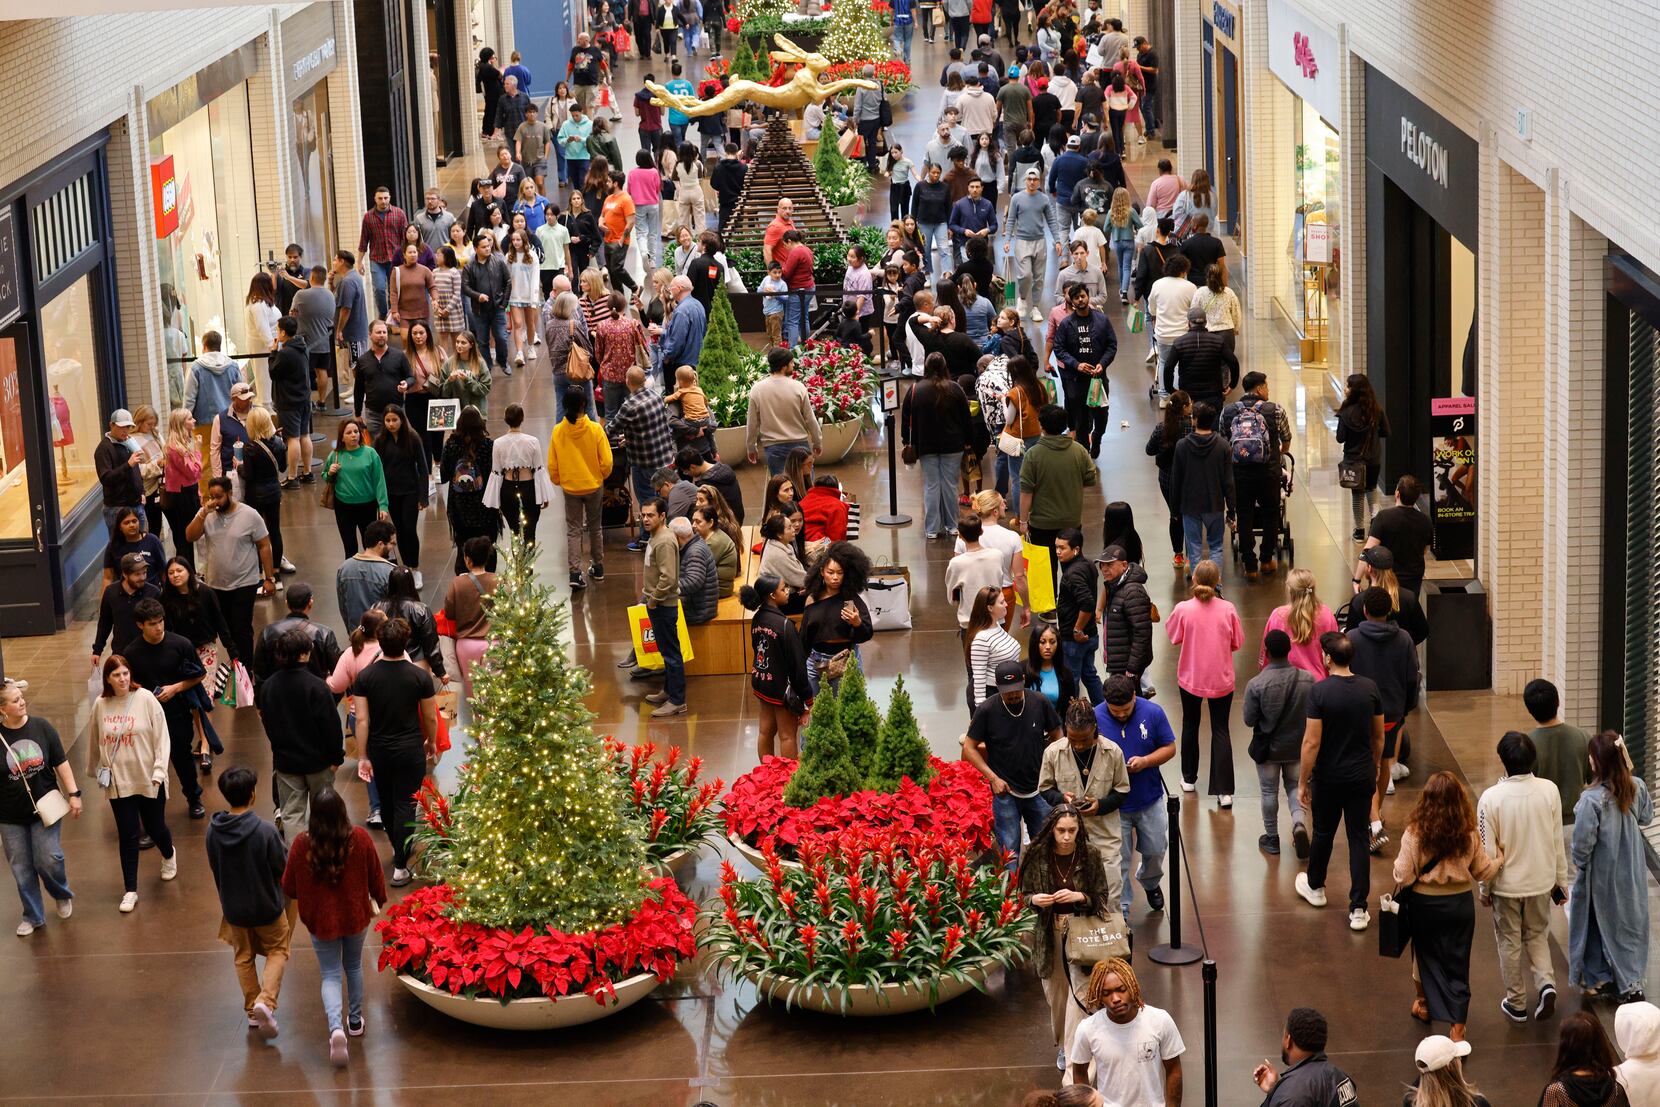 Texans throttle holiday spending as retailers put hopes on next